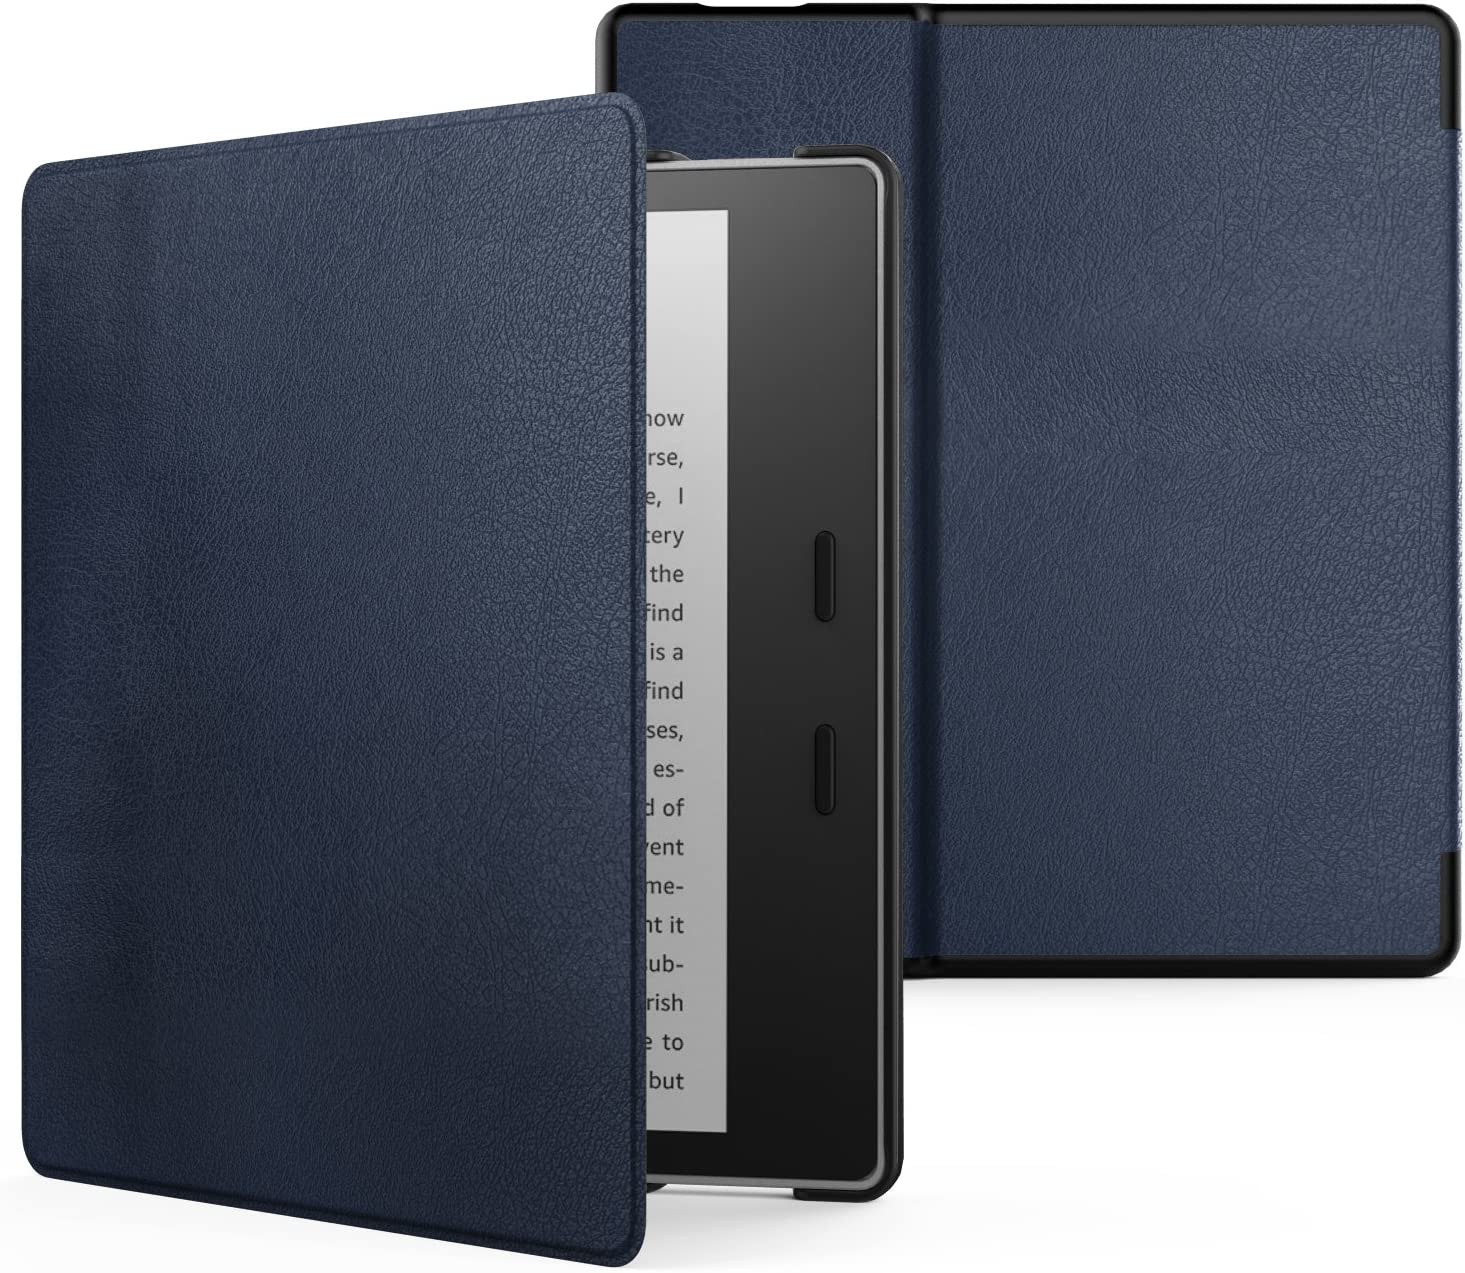 MoKo Case Fits All-New 7“ Kindle Oasis (9th and 10th Generation